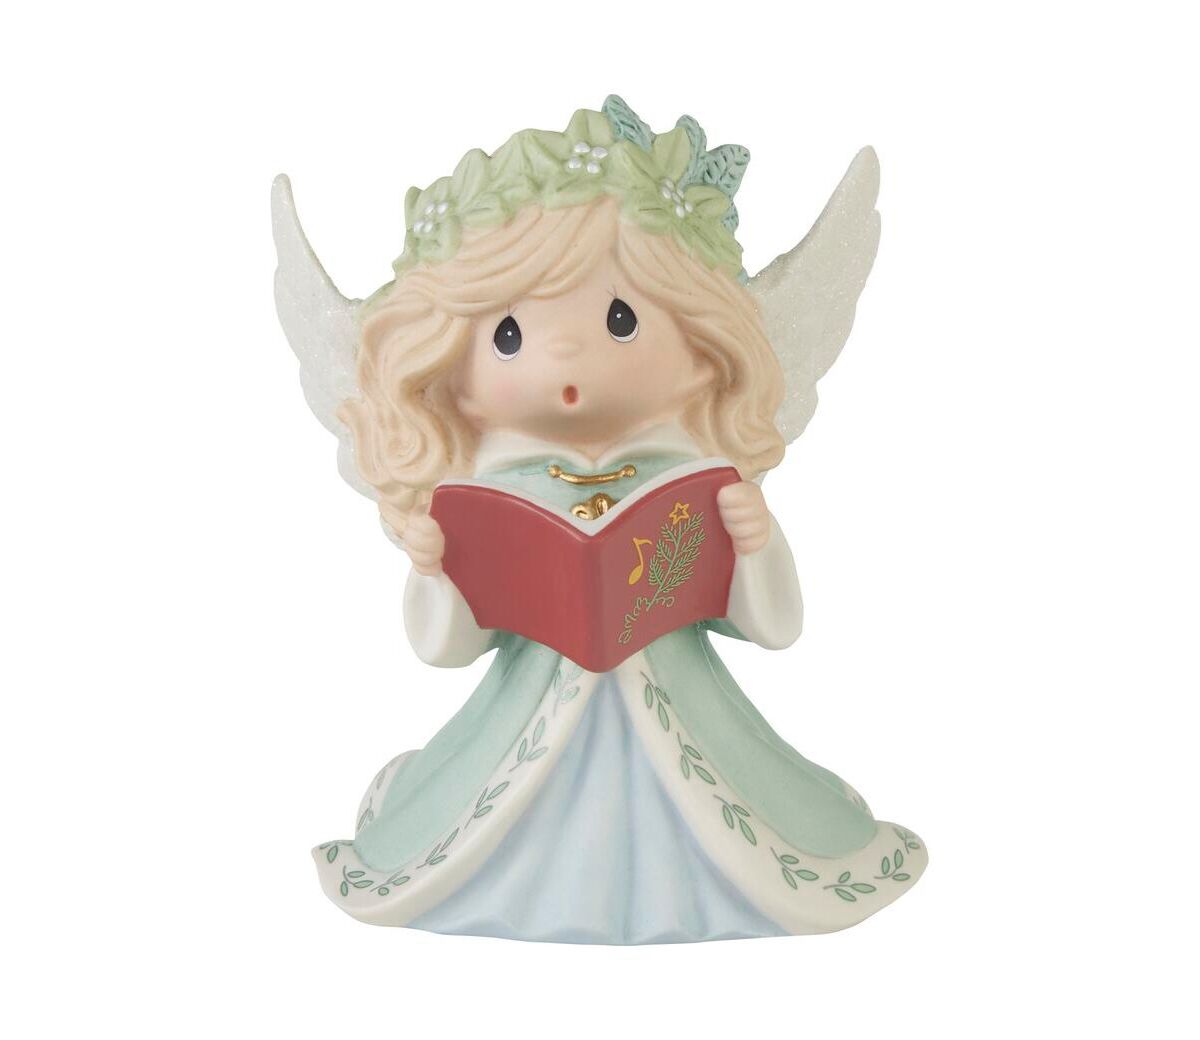 Precious Moments Wishing You Joyful Sounds of The Season Annual Angel Bisque Porcelain Figurine - Multicolored